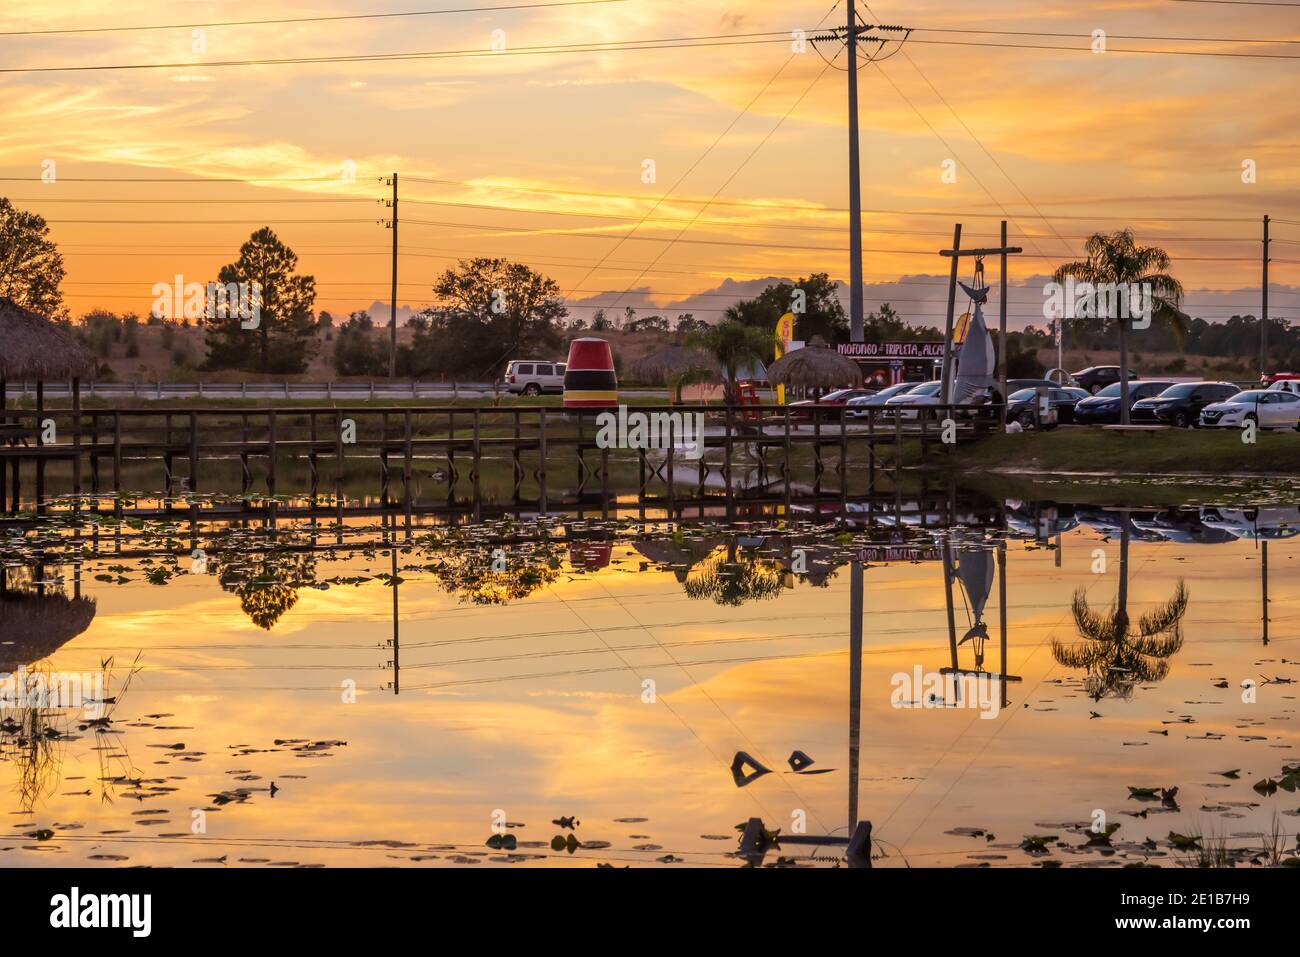 Sunset view of lake, sushi food truck, and US Highway 27 from the citrus groves at Showcase of Citrus in Clermont, Florida, near Orlando. (USA) Stock Photo